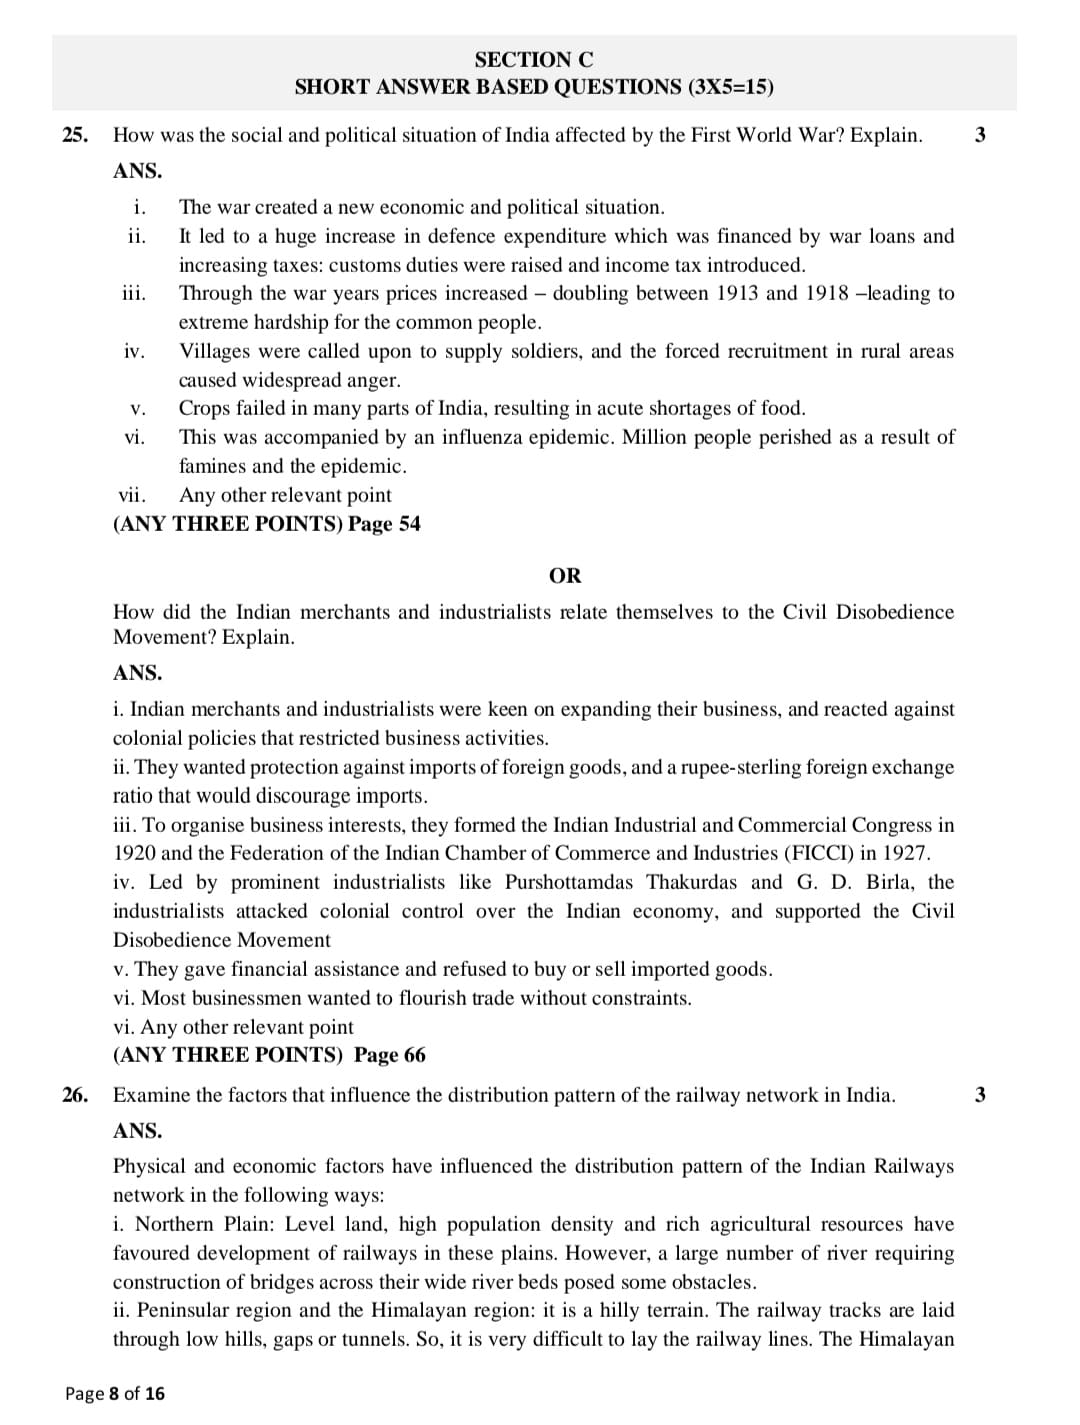 cbse class 10 social science official sample question paper8